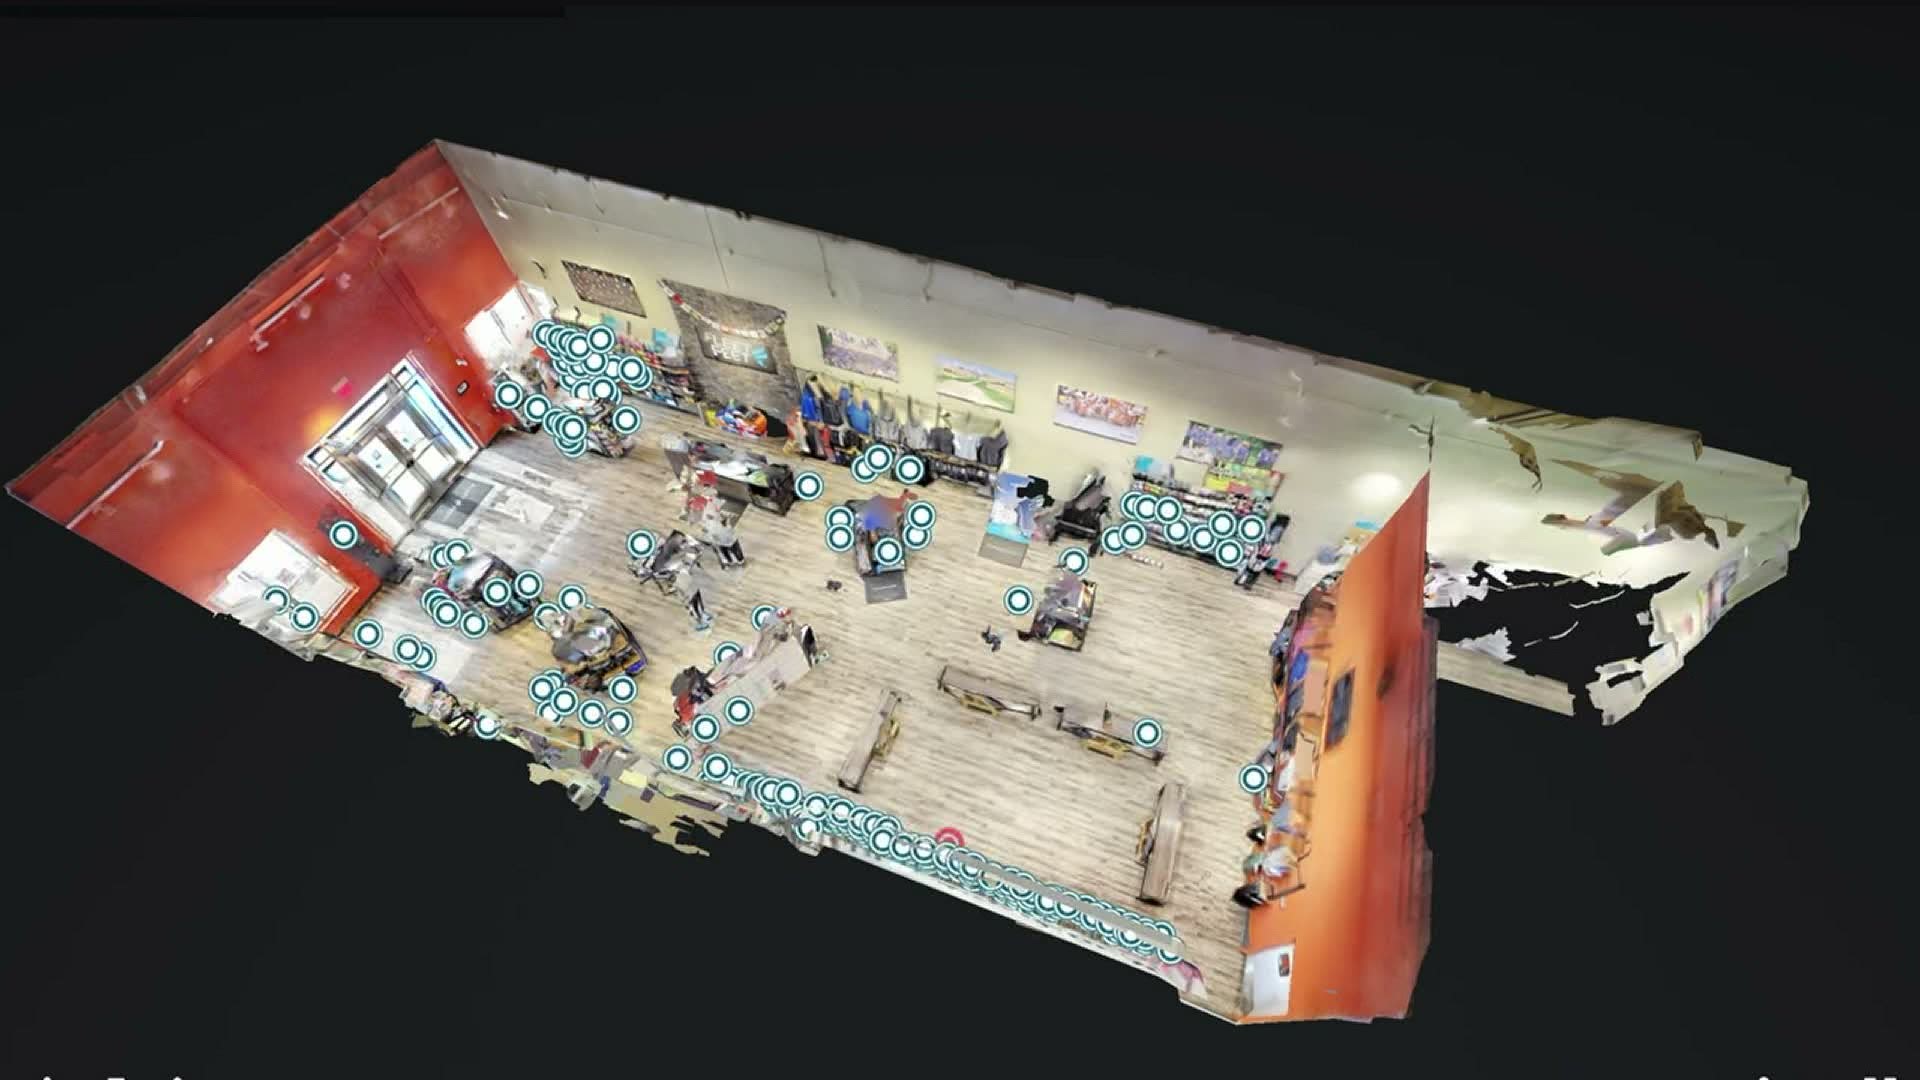 Customers can now experience Fleet Feet's store in 3D from home.